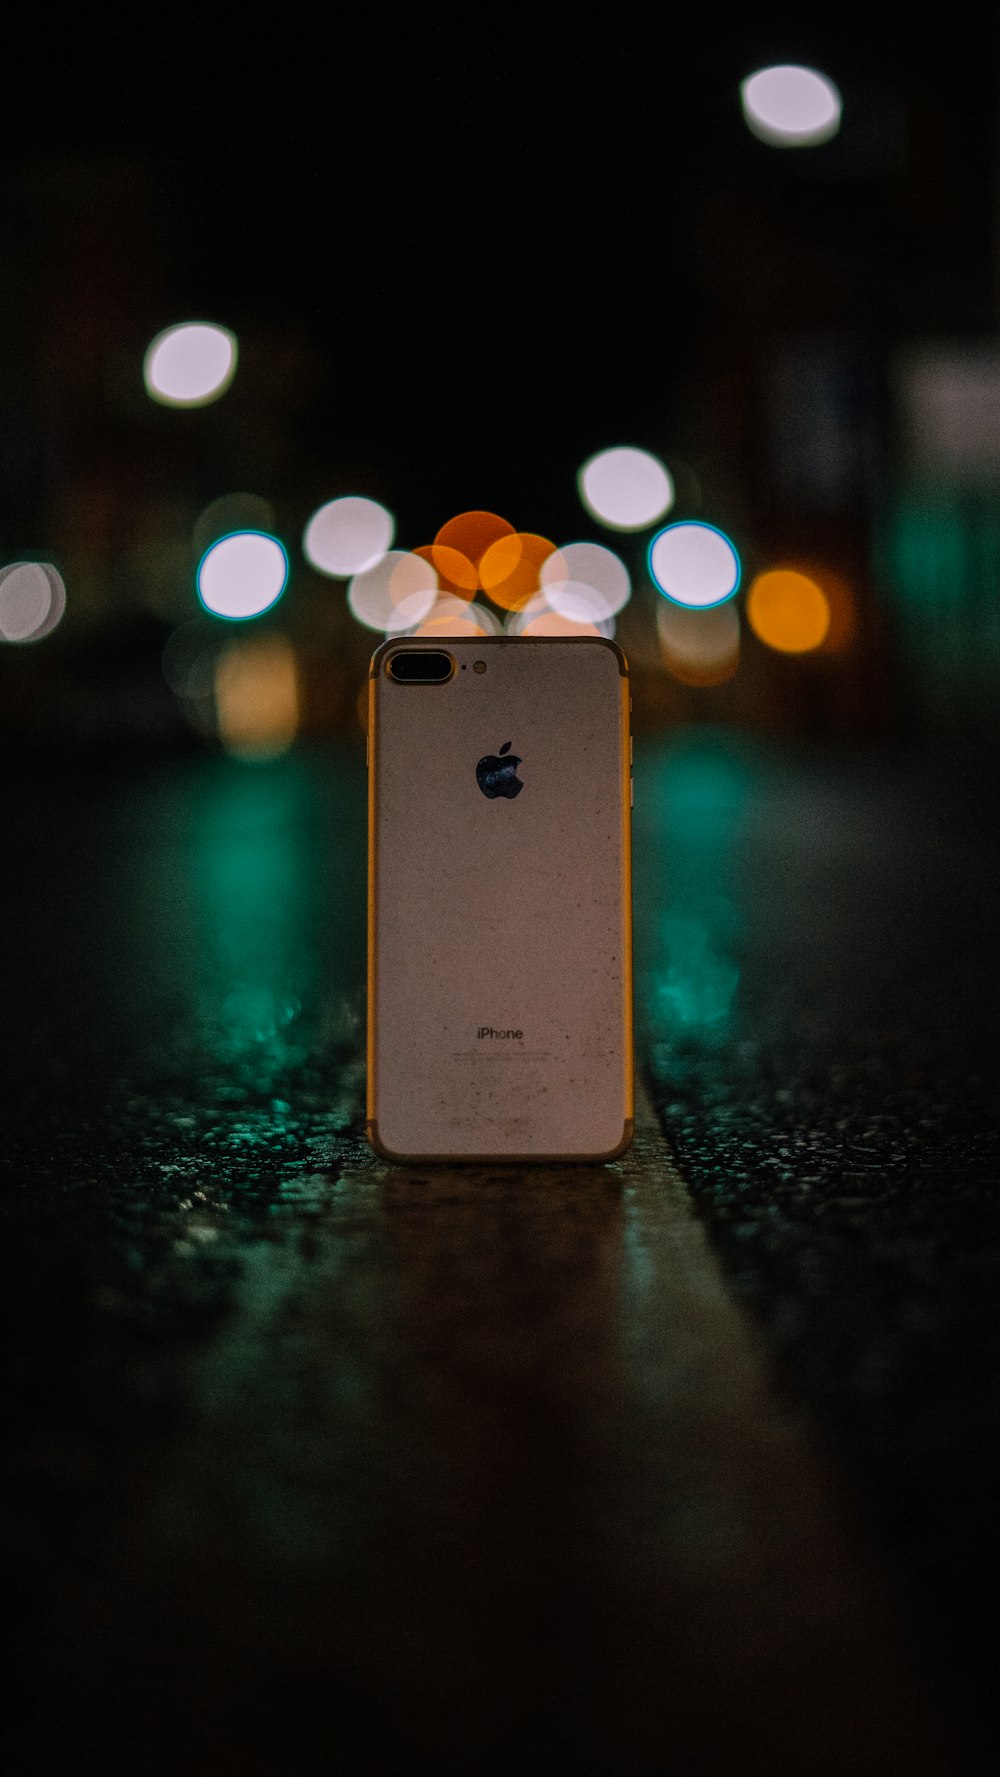 Rose gold iPhone 8 Plus standing upright in the middle of the road during  night photo – Free Phone Image on Unsplash